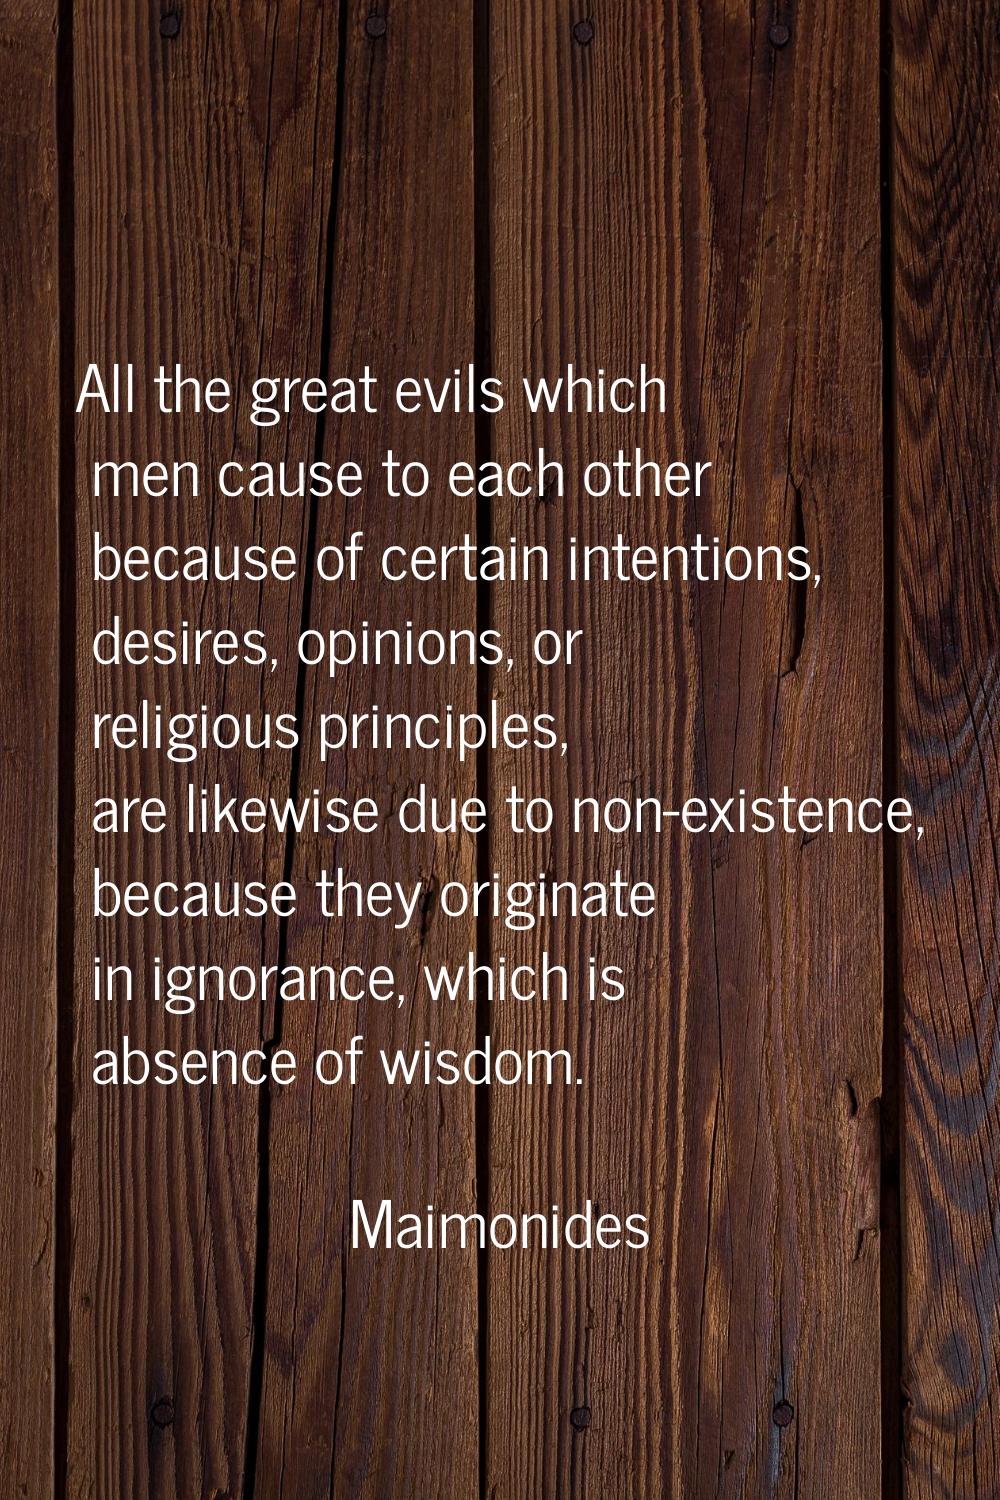 All the great evils which men cause to each other because of certain intentions, desires, opinions,